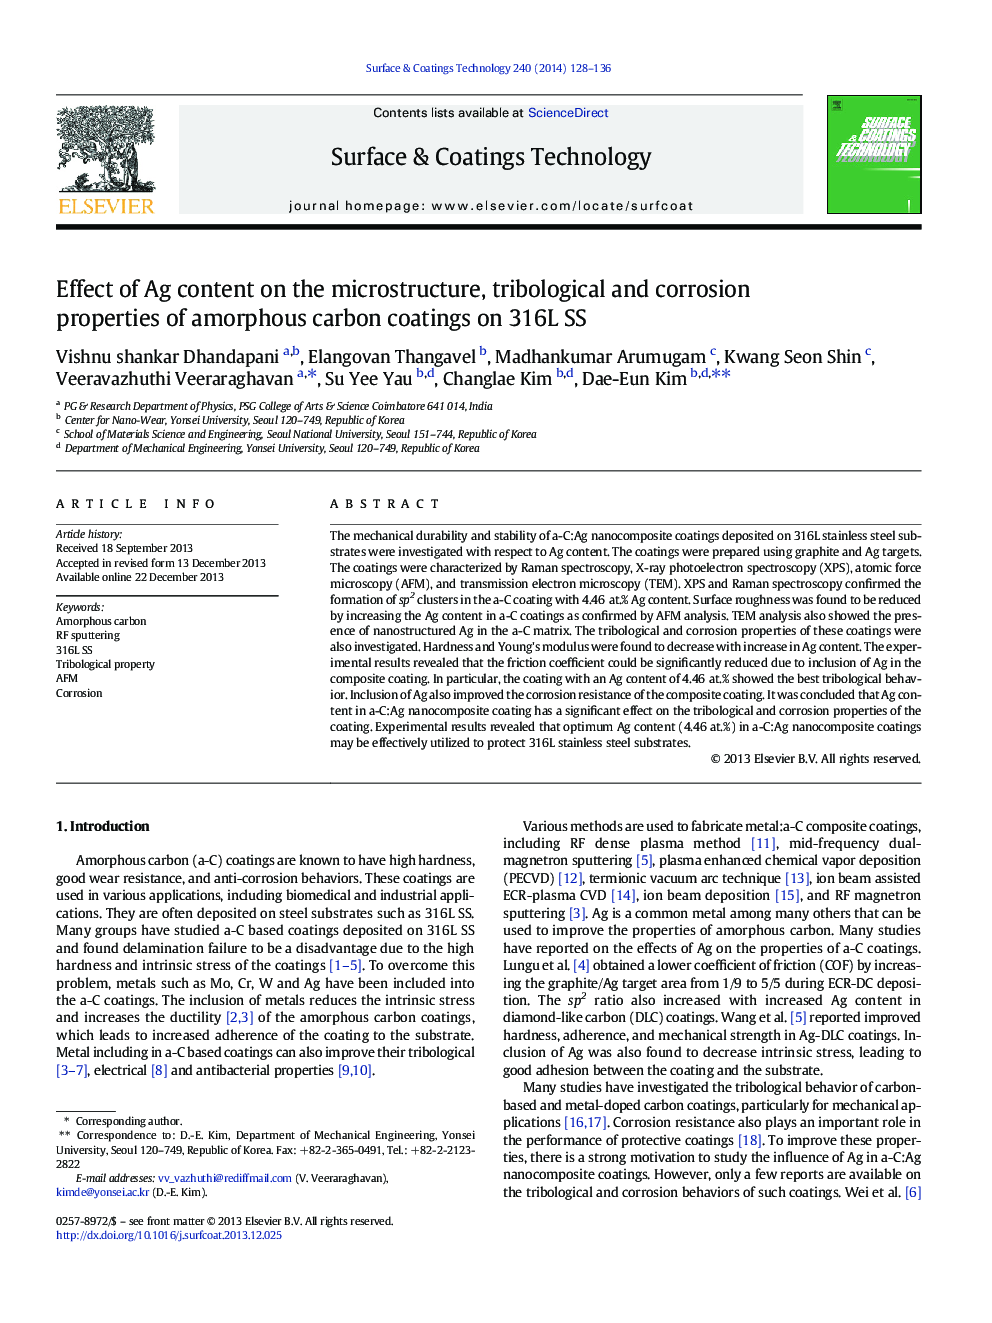 Effect of Ag content on the microstructure, tribological and corrosion properties of amorphous carbon coatings on 316L SS